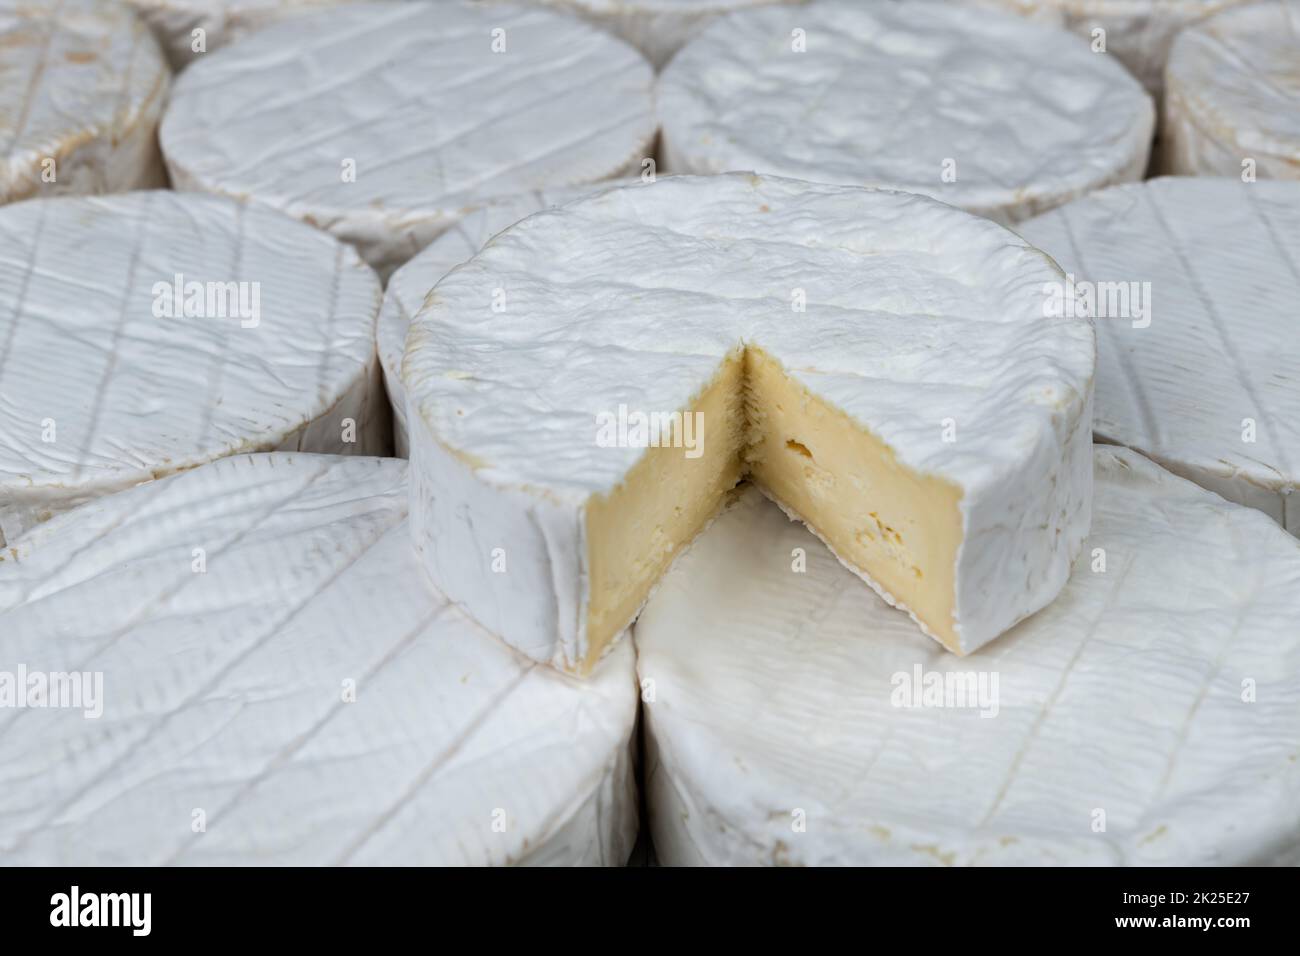 Camembert tasted and french cheese Stock Photo